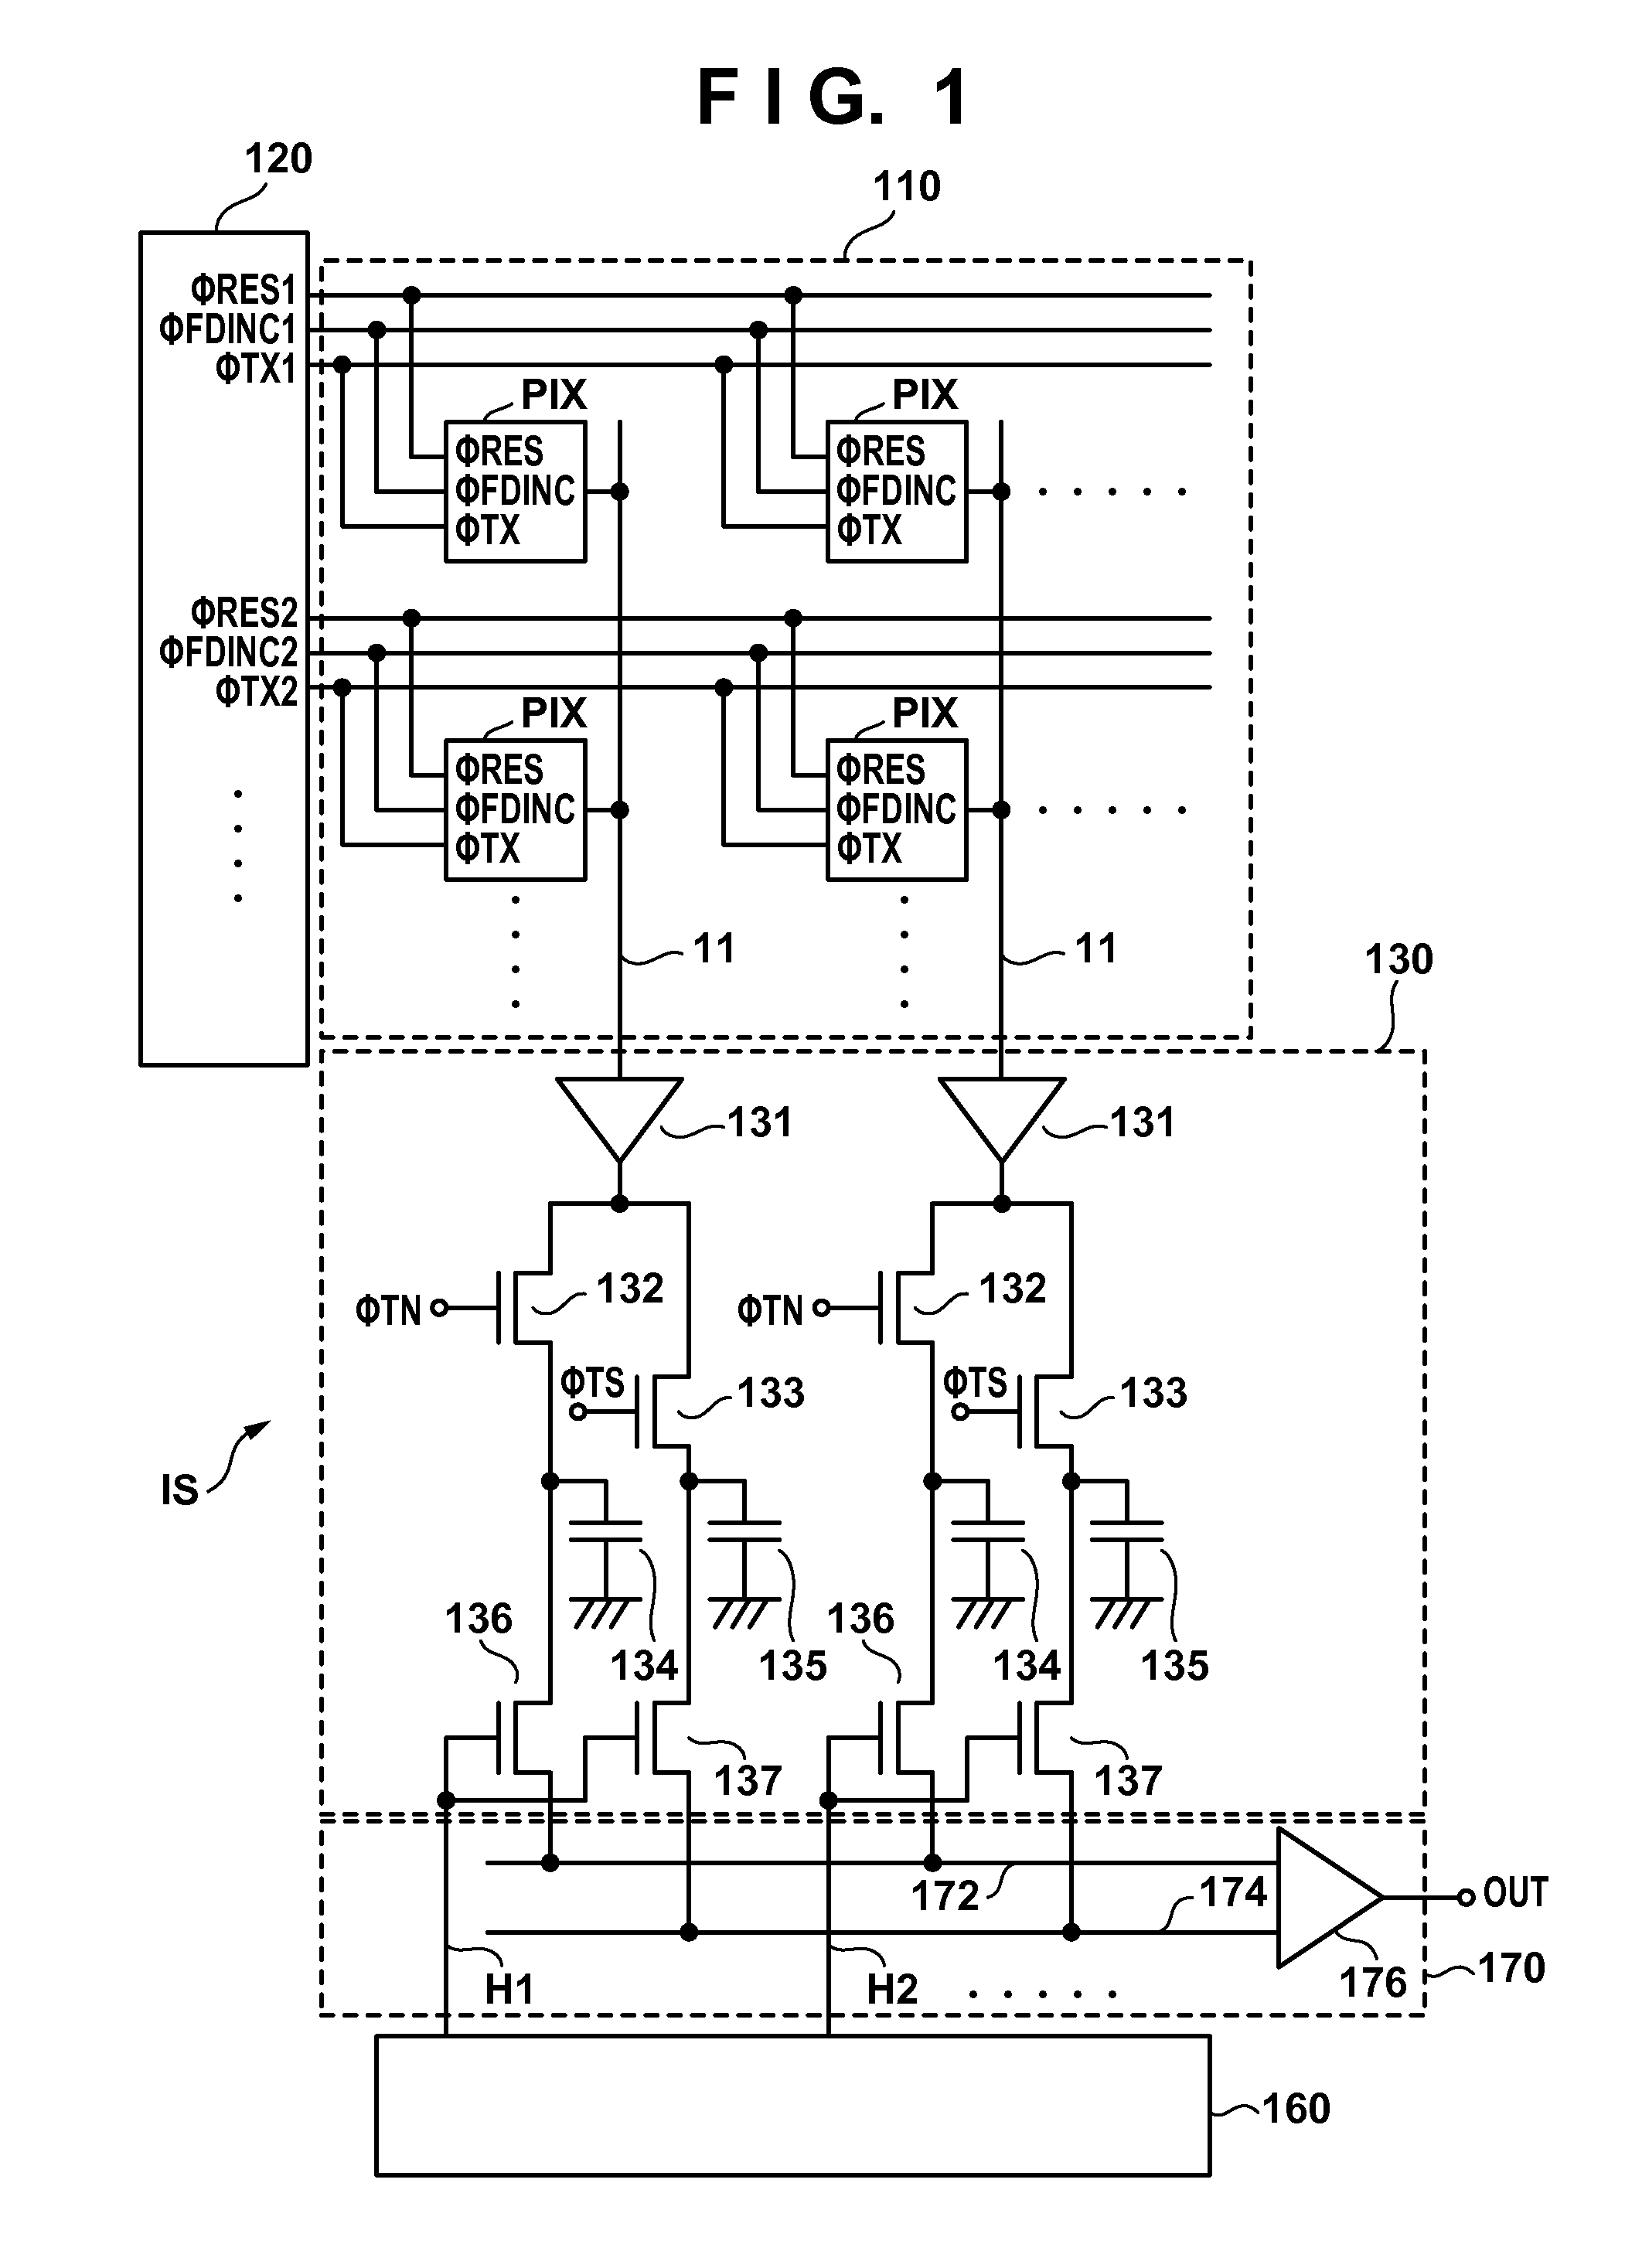 Solid-state image sensor and camera with charge-voltage converter